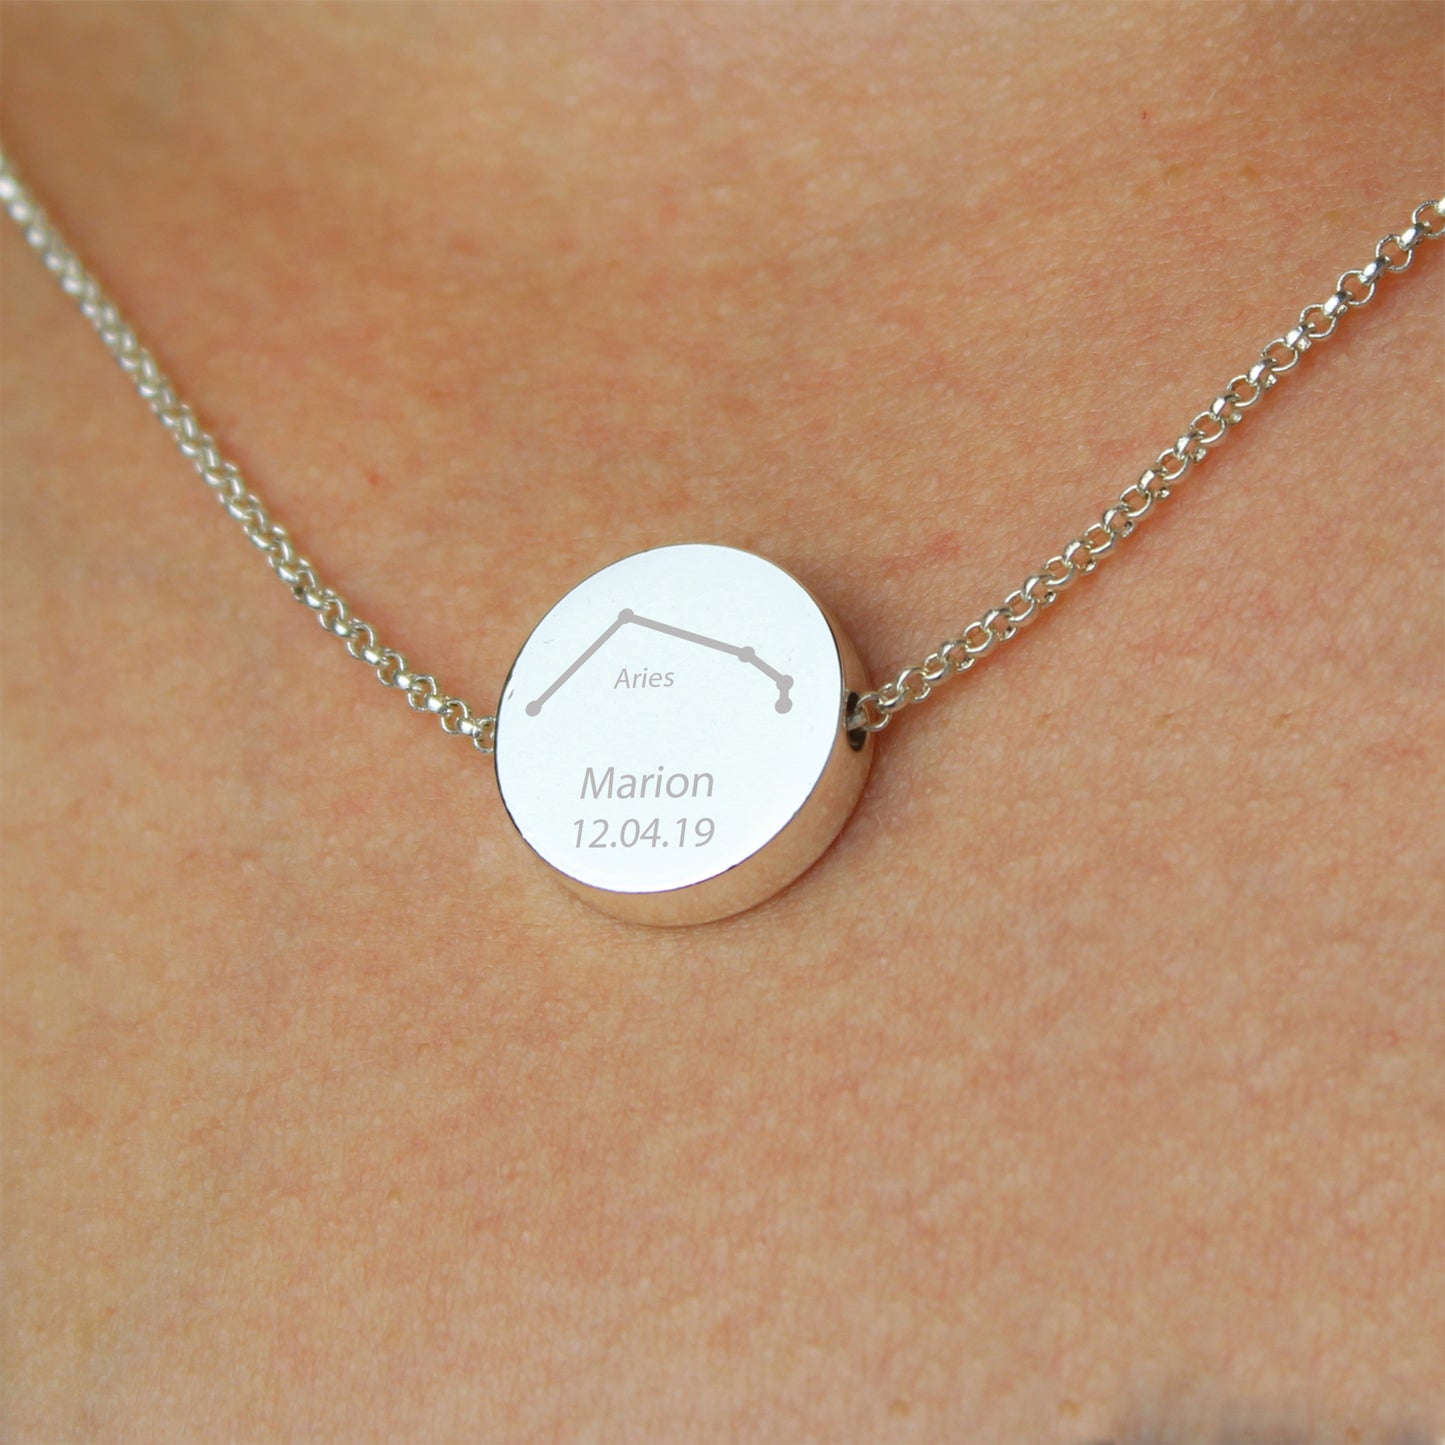 Personalised Aries Zodiac Star Sign Silver Tone Necklace (March 21st-April 19th) - Personalise It!